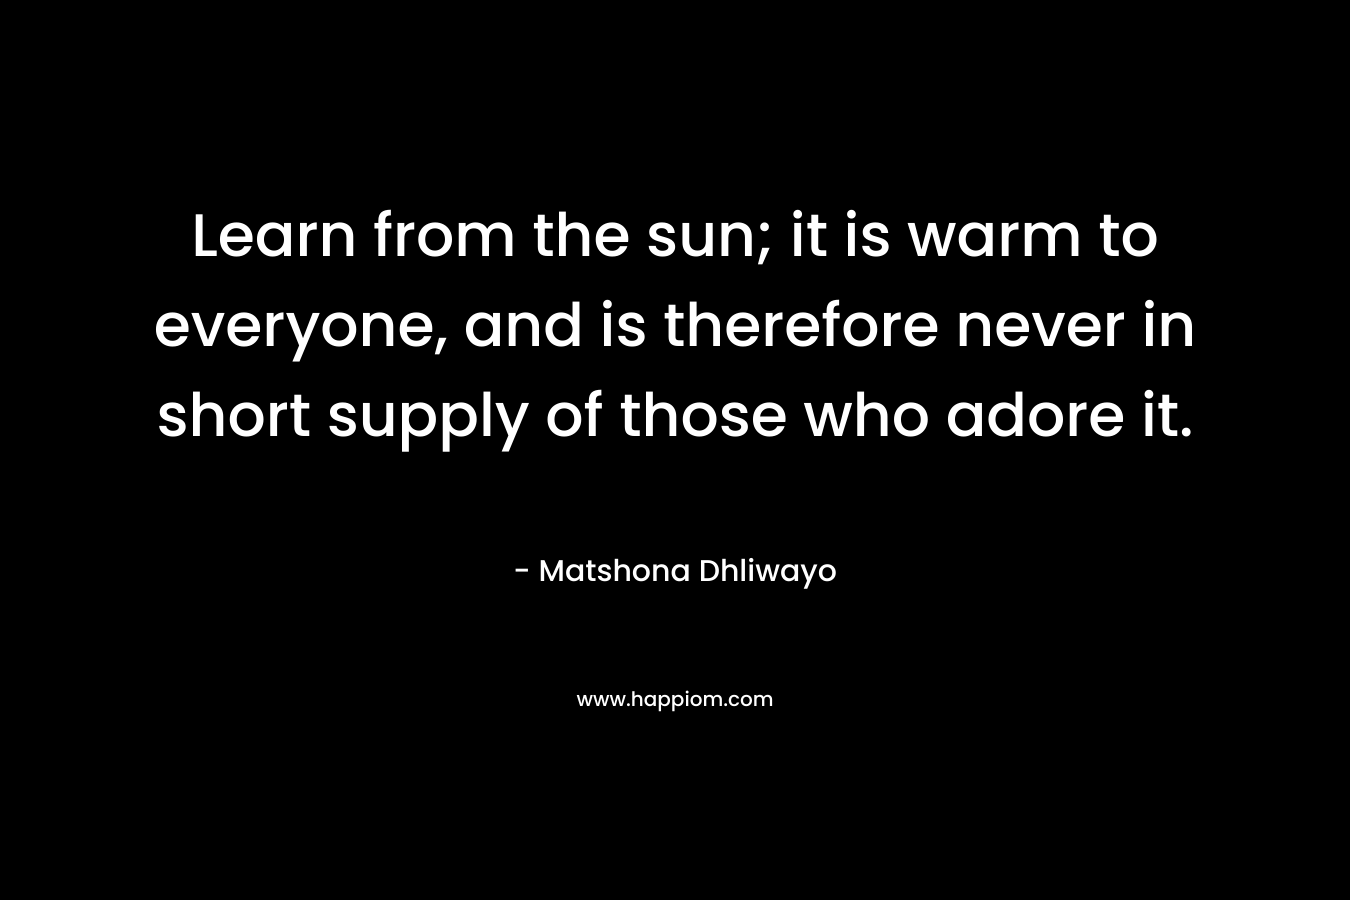 Learn from the sun; it is warm to everyone, and is therefore never in short supply of those who adore it.